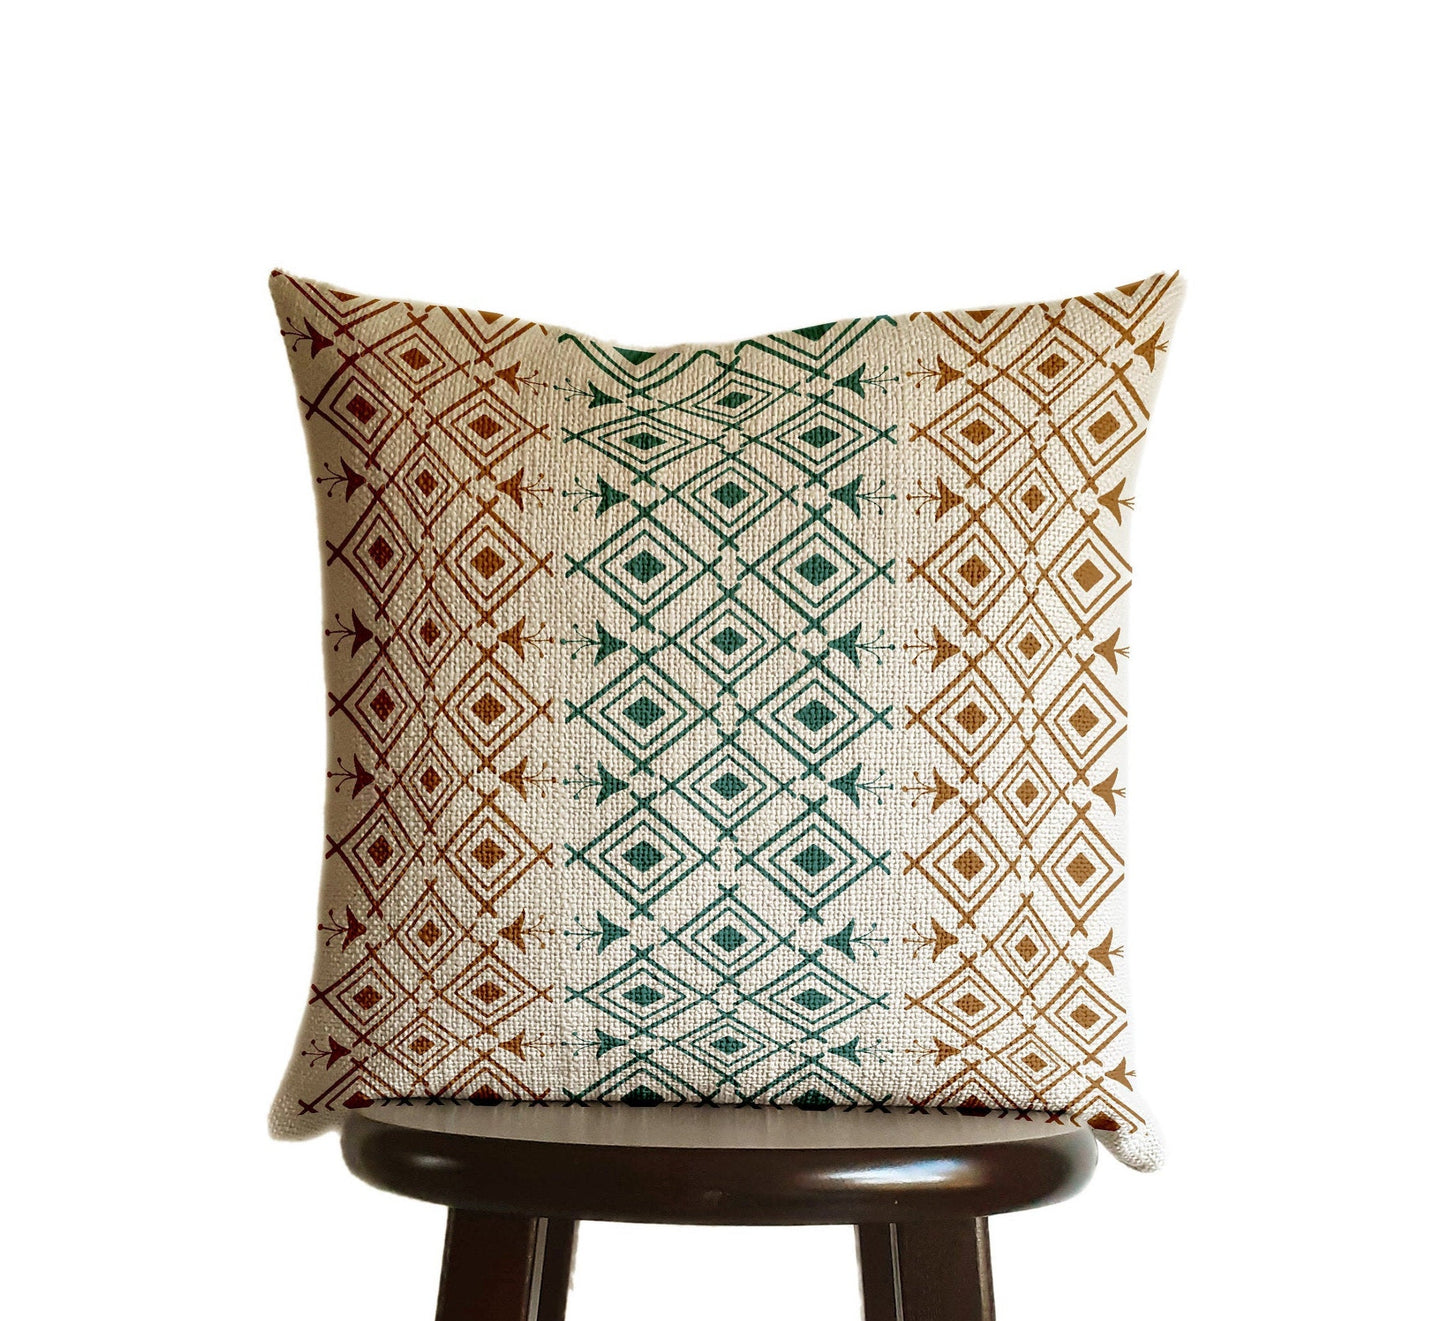 Moroccan Pillow Cover Print Copper Bronze Brown Teal Blue Green, Natural Oatmeal Color Textured Woven Fabric in Modern Boho Home Decor - 18x18"